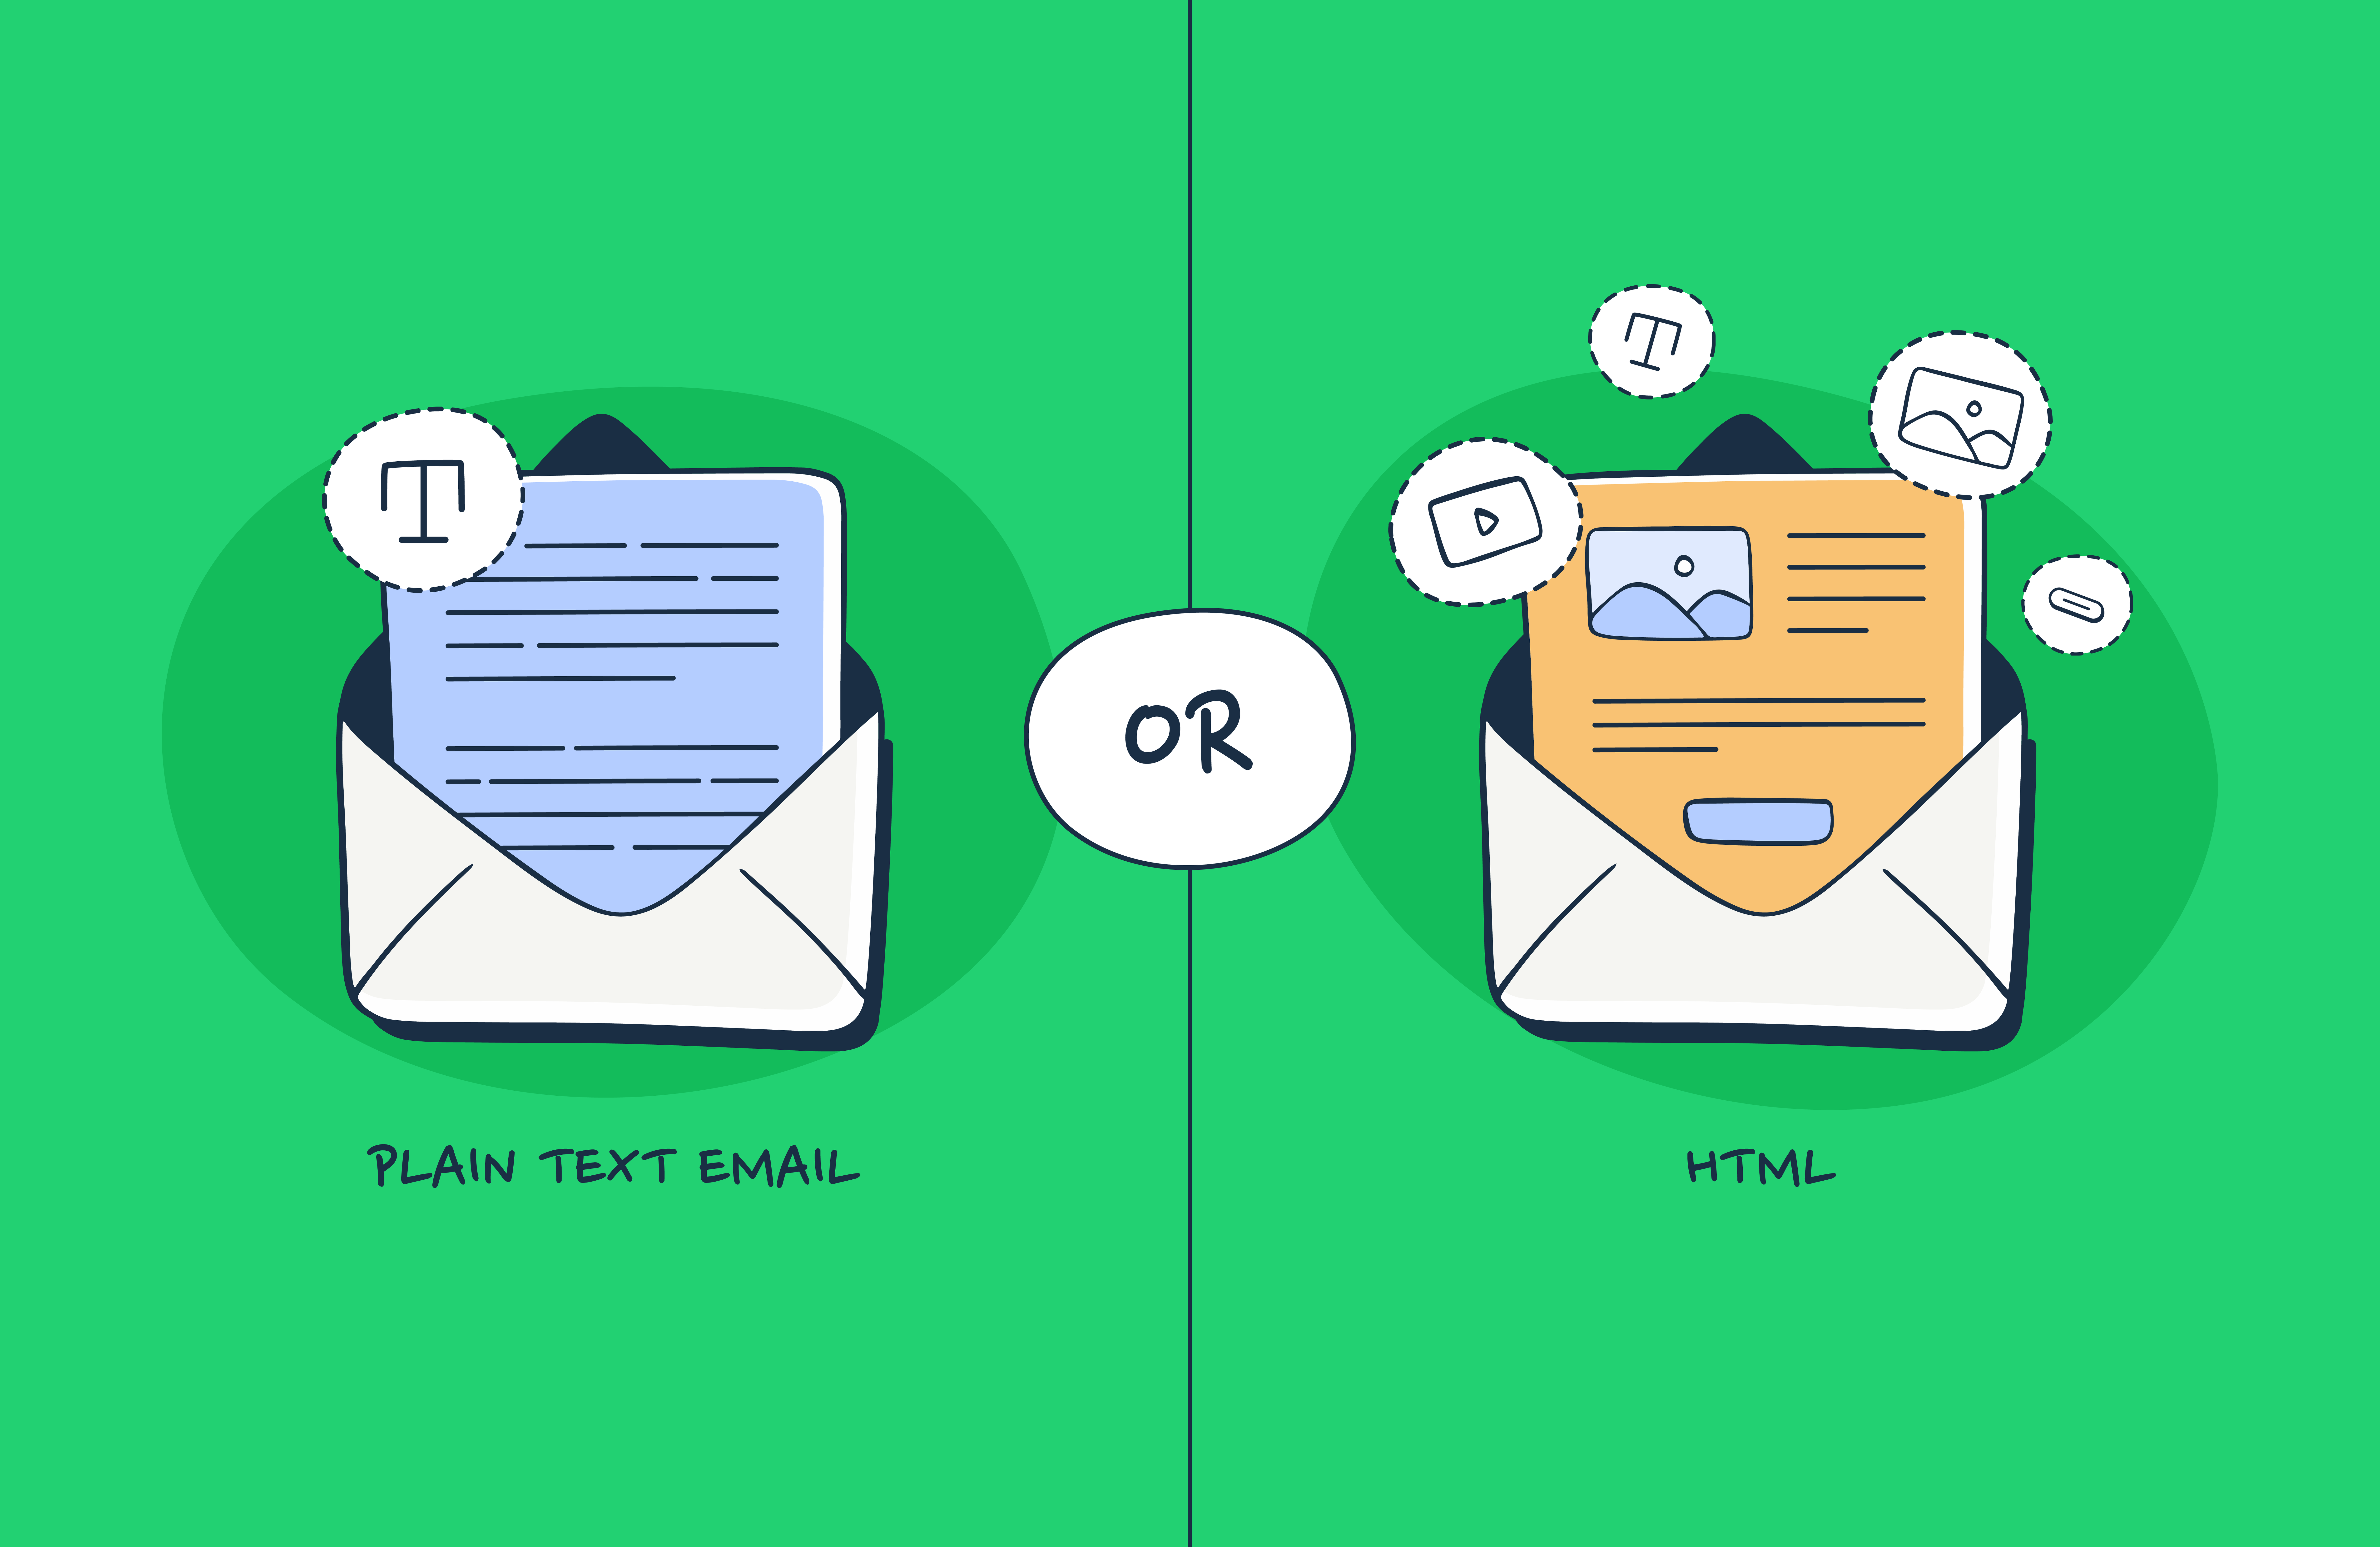 This is a graphic representation of the difference between plain text and HTML emails